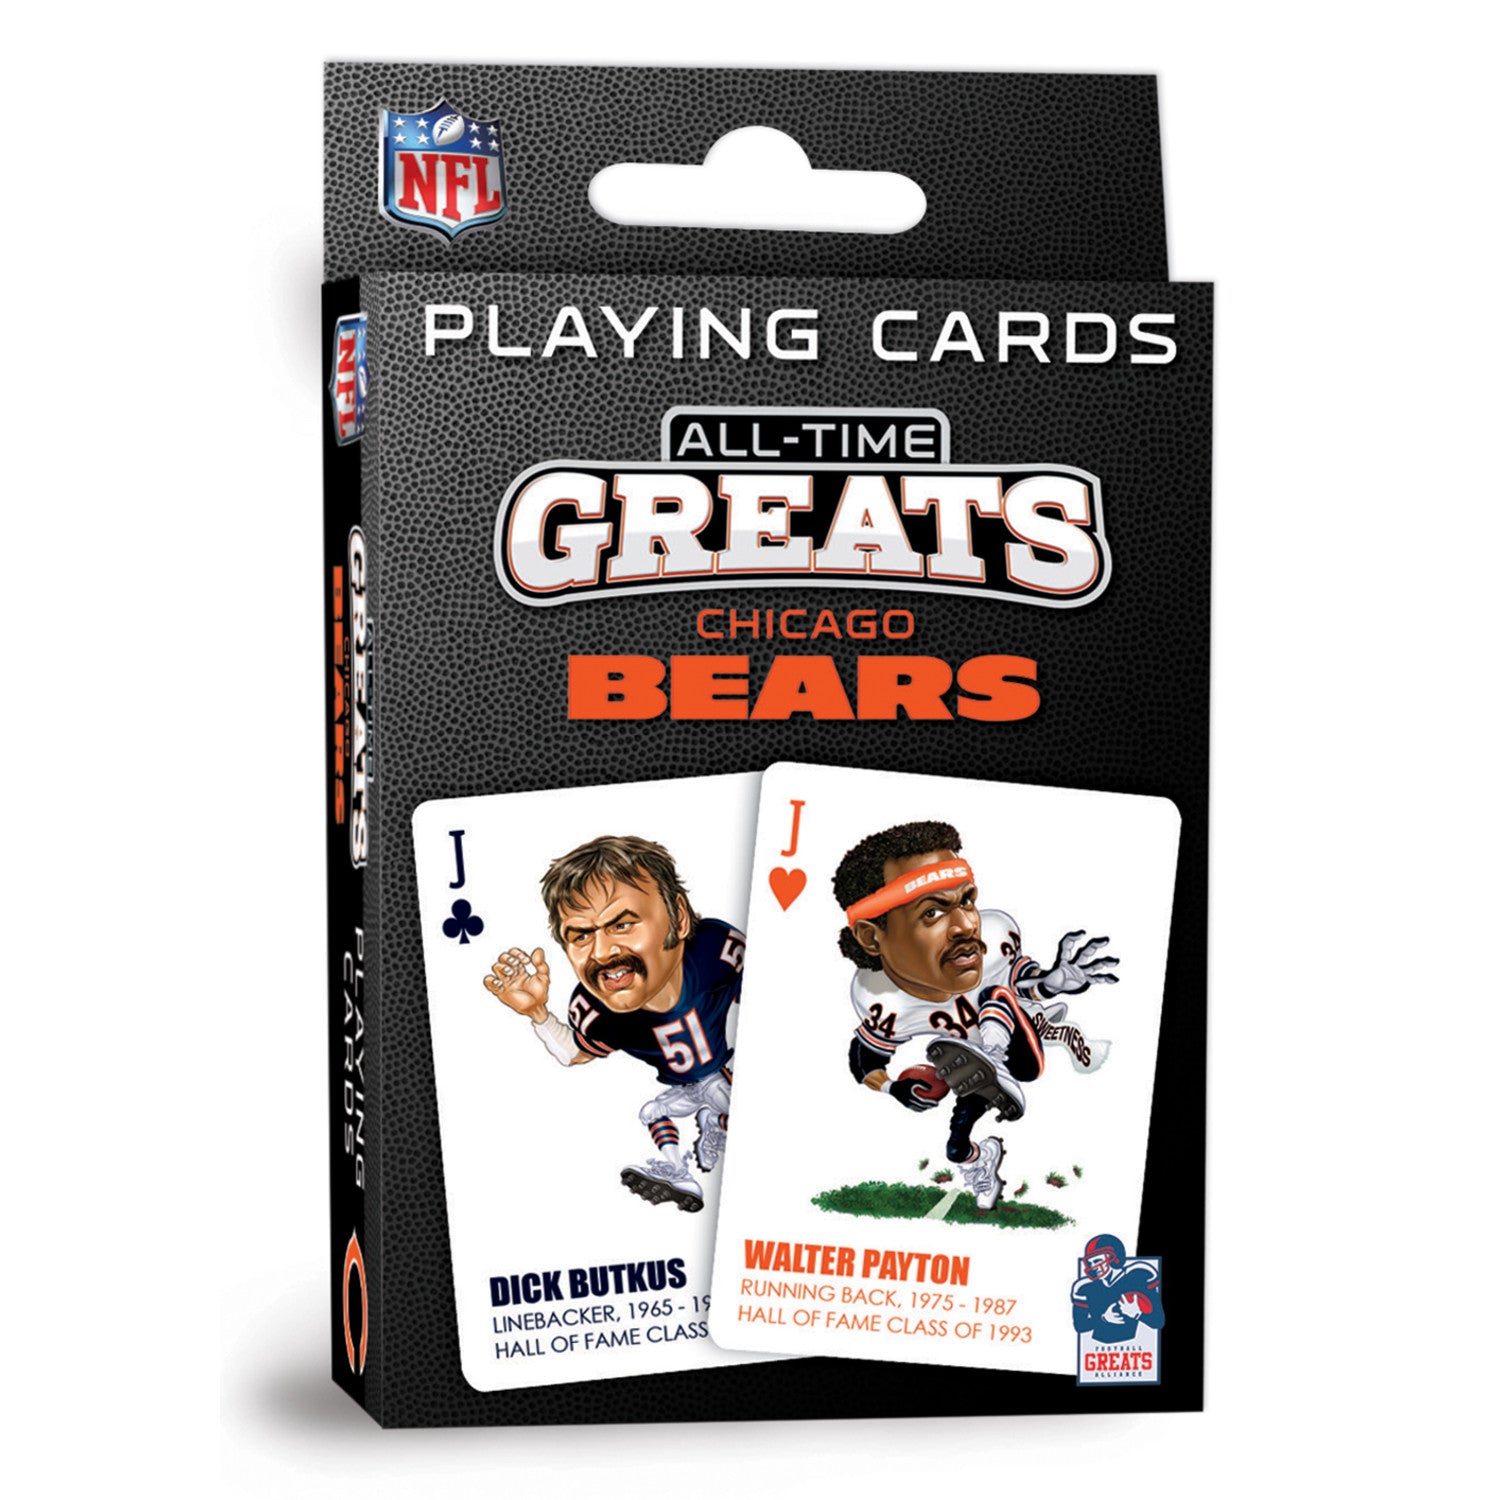 Chicago Bears All-Time Greats Playing Cards - 54 Card Deck